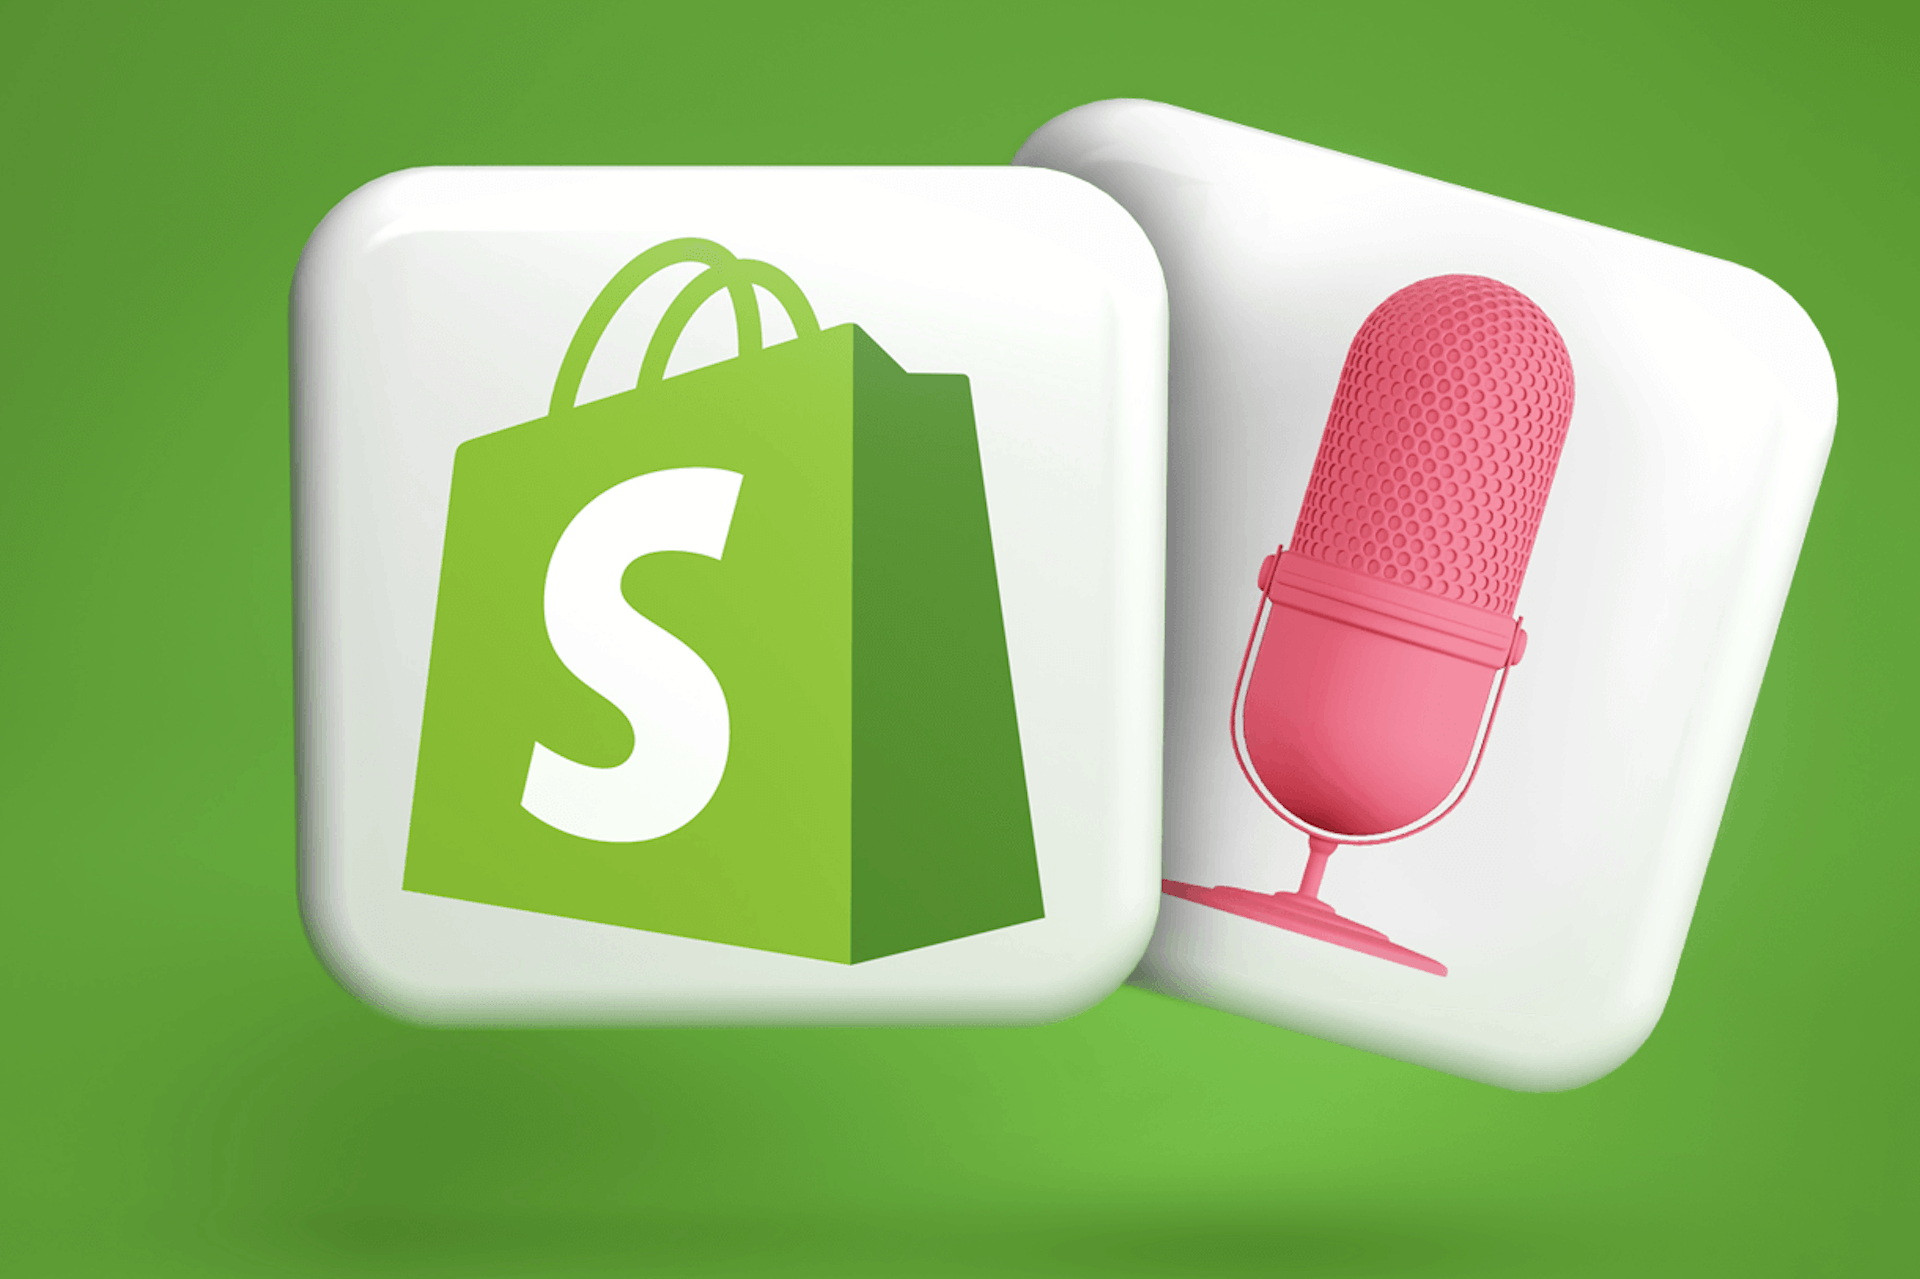 Image of two large white tiles, one with a large Shopify logo and one with a pink podcasting microphone, on a dark green background. Best Shopify podcasts blog post.